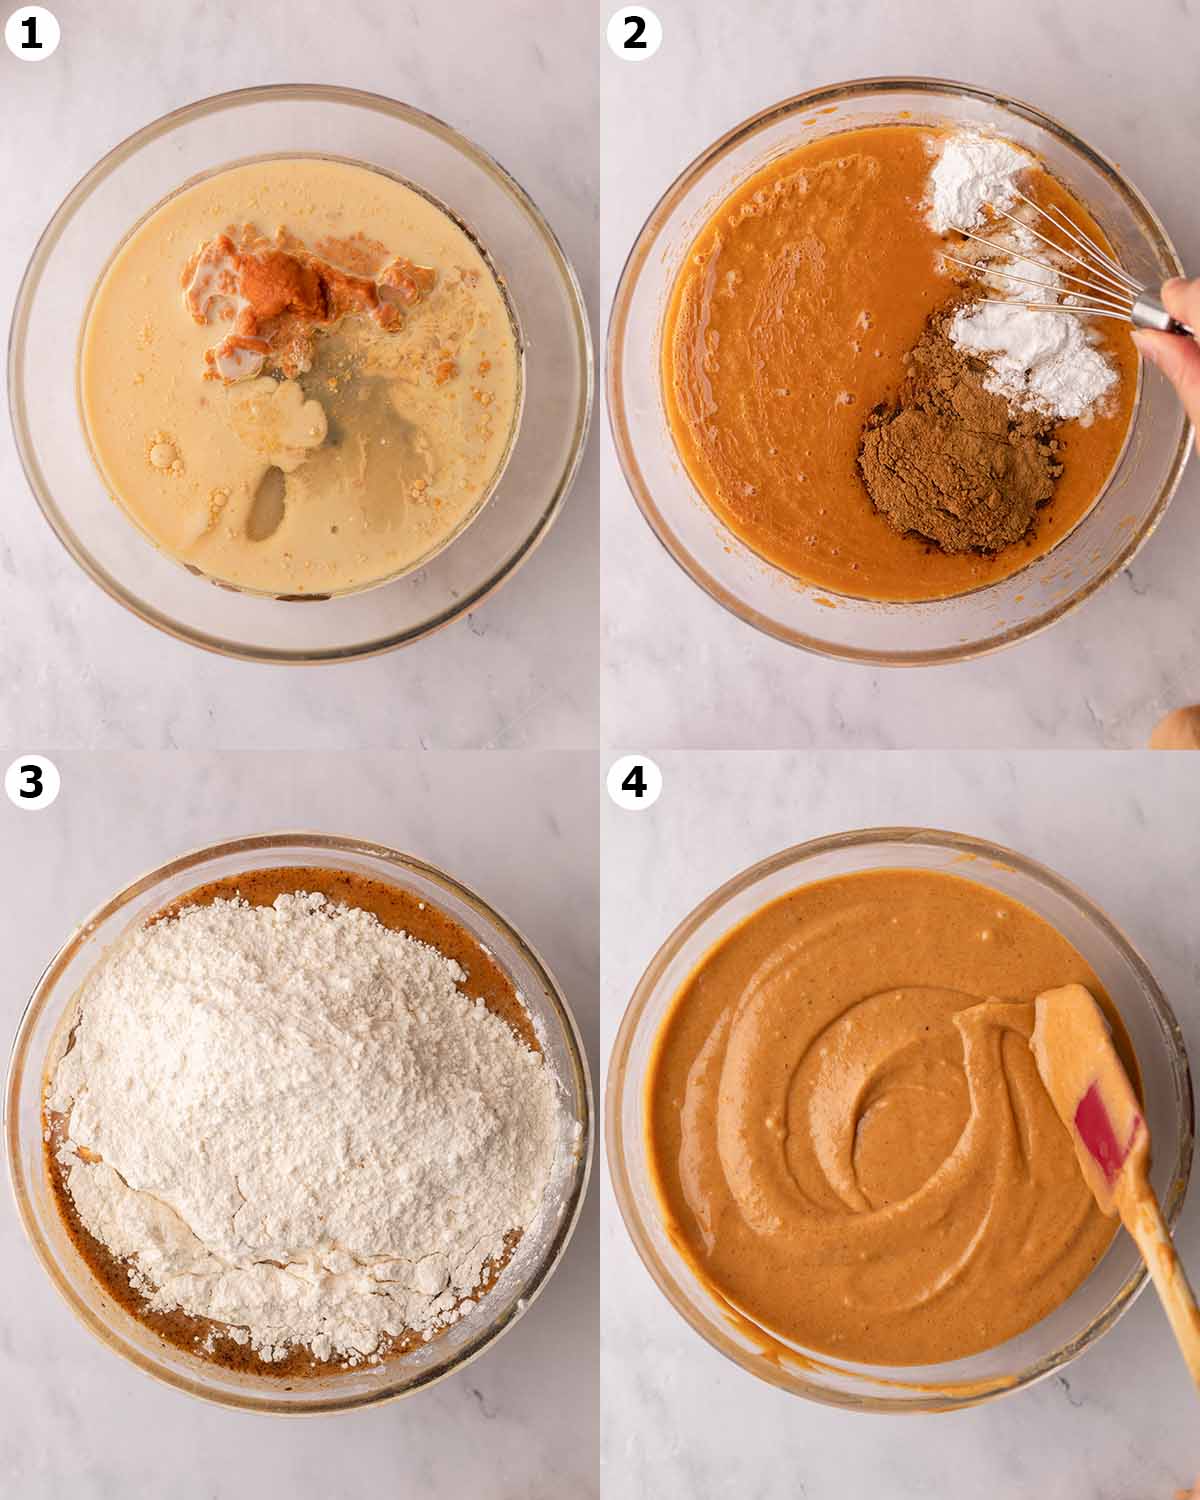 Four image collage showing the steps for making the cake batter for the recipe.